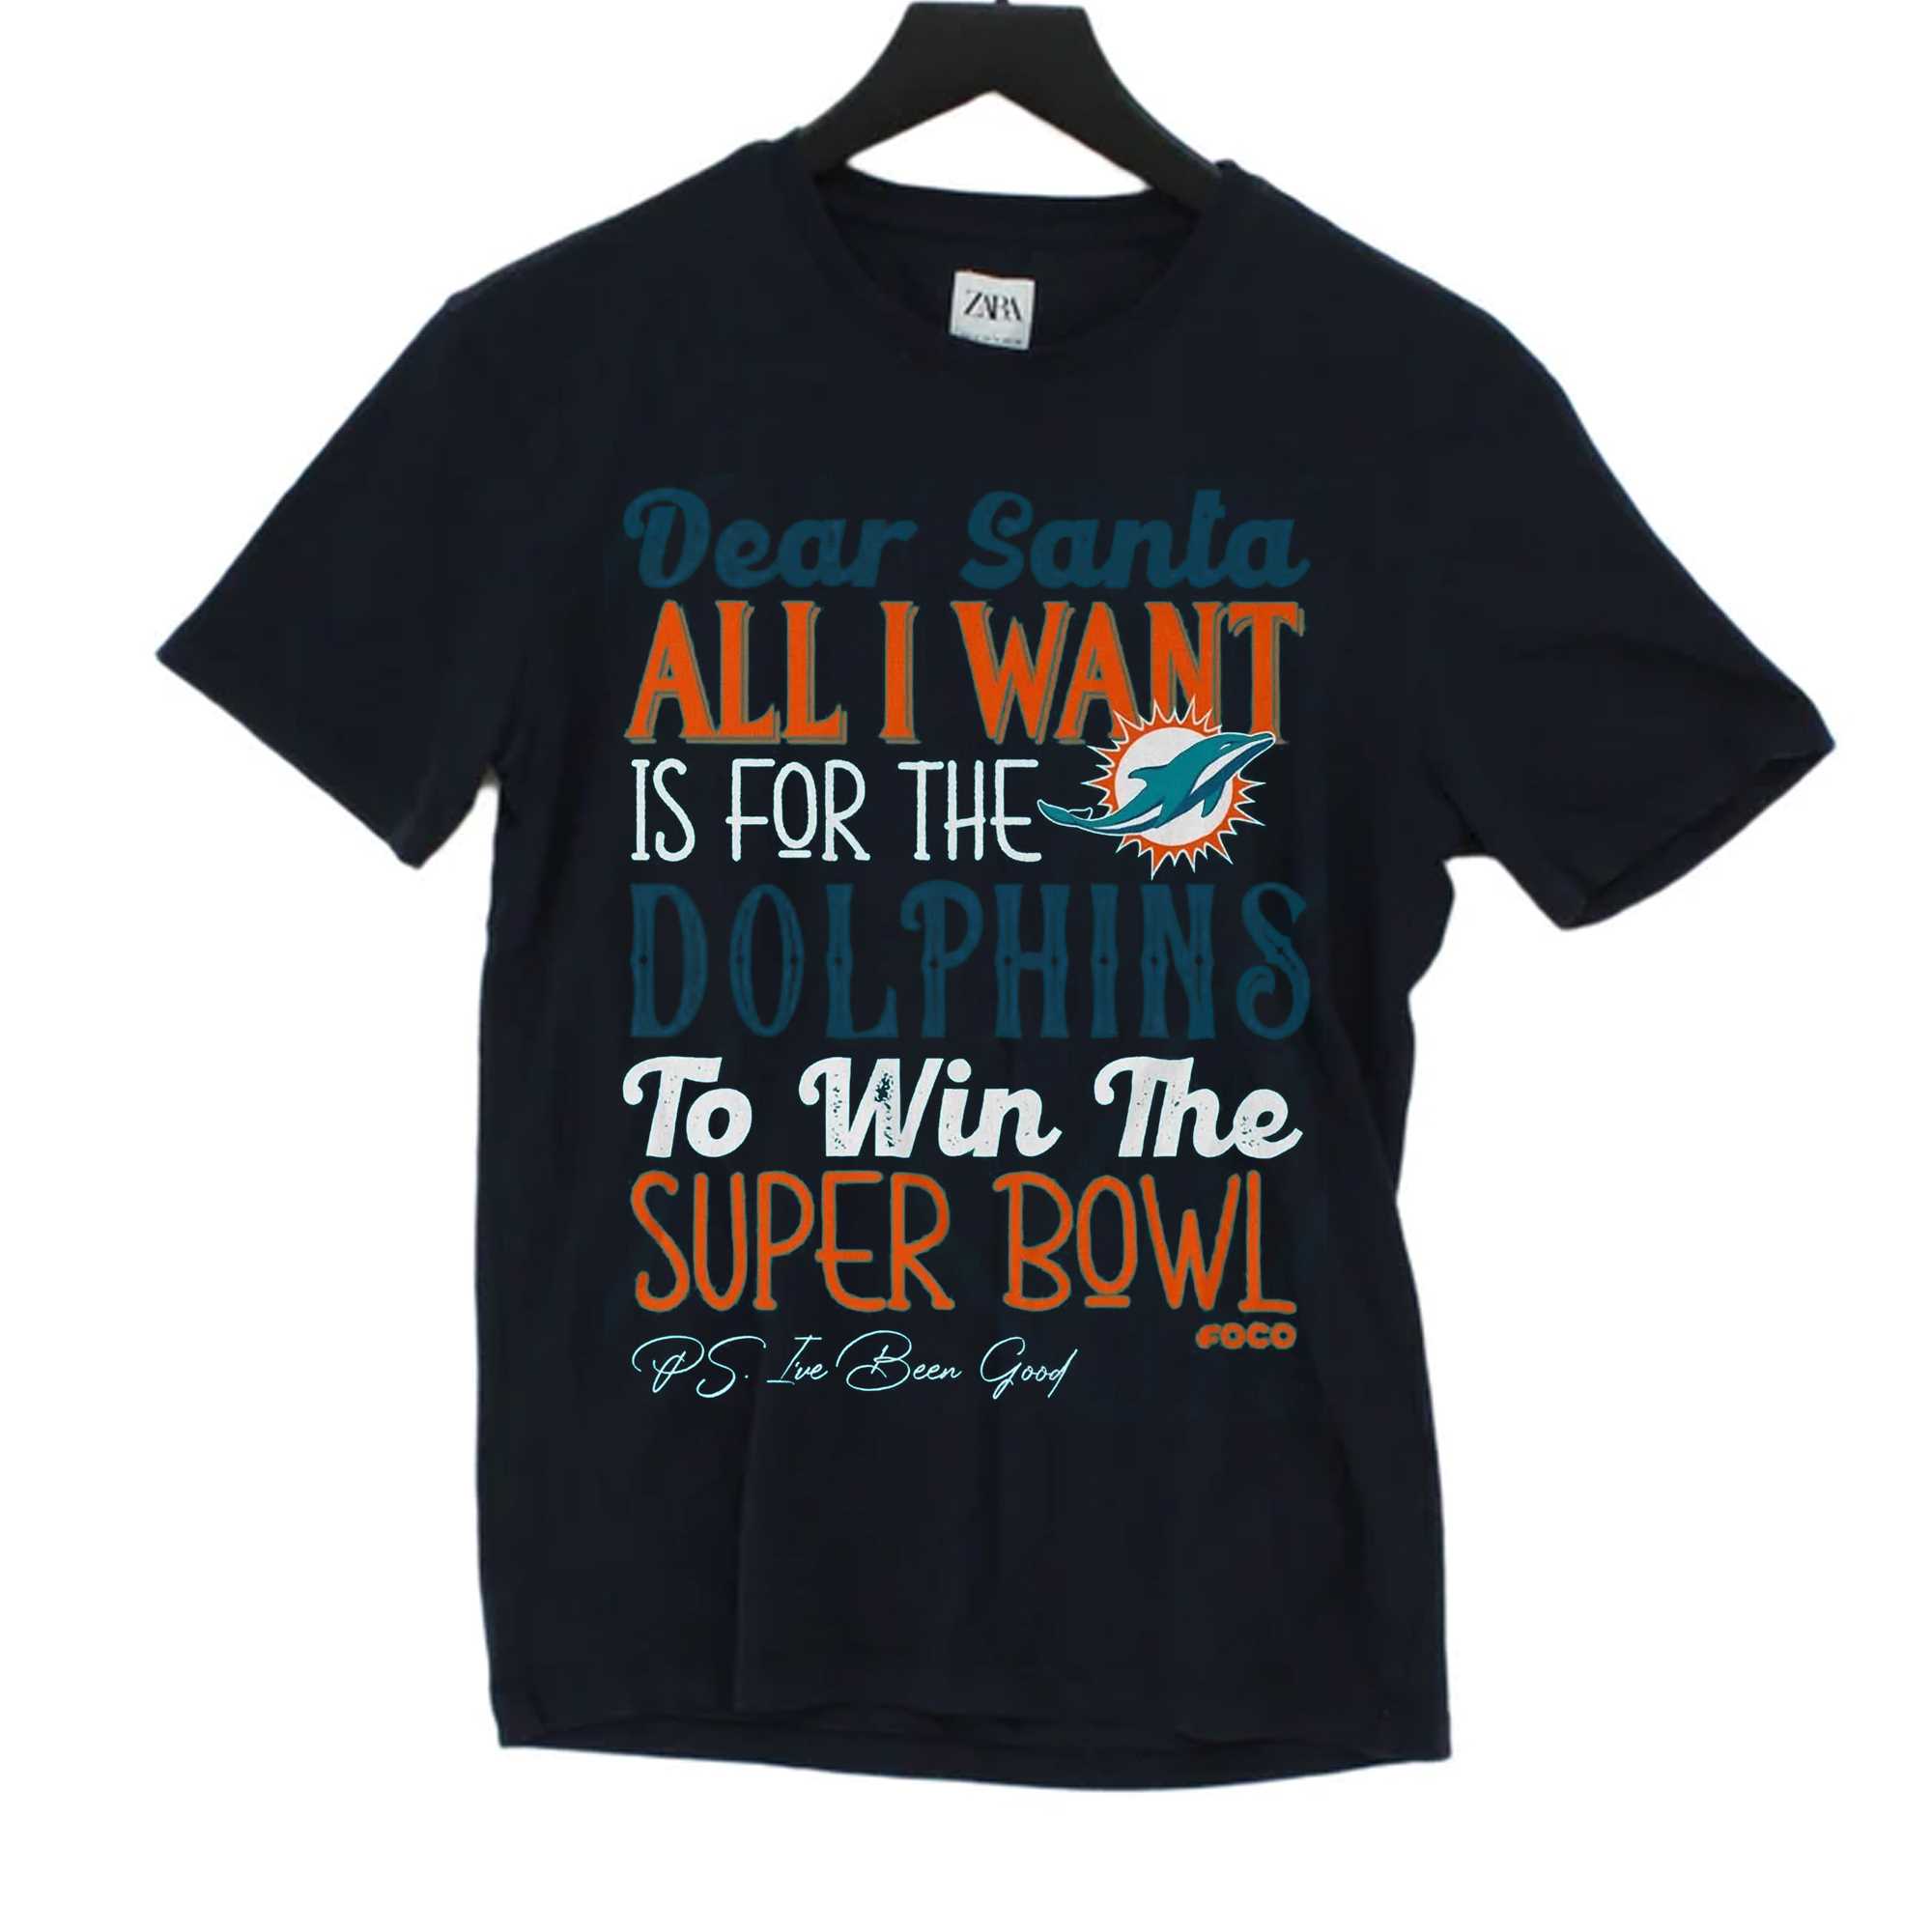 Miami Dolphins Shop - Dear Santa All I Want Is For The Miami Dolphins To Win The Super Bowl T Shirt